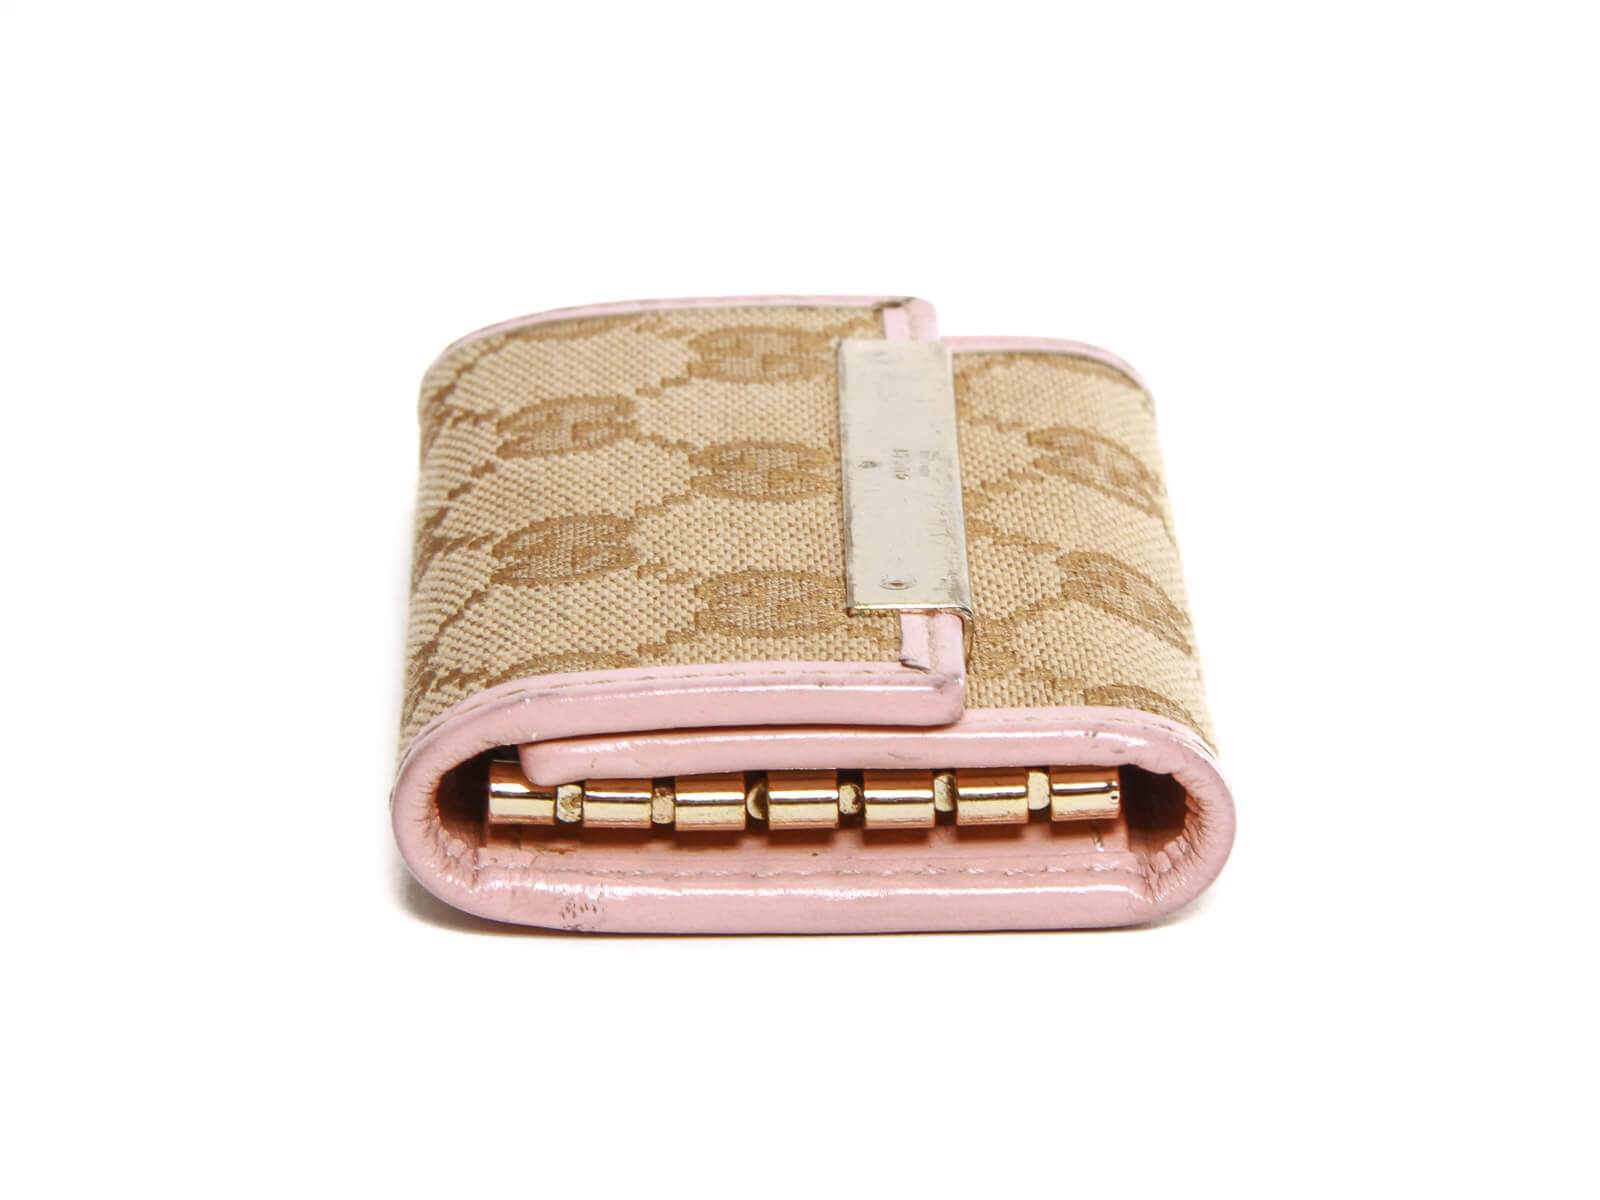 Authentic Gucci key case GG canvas from Japan A0004